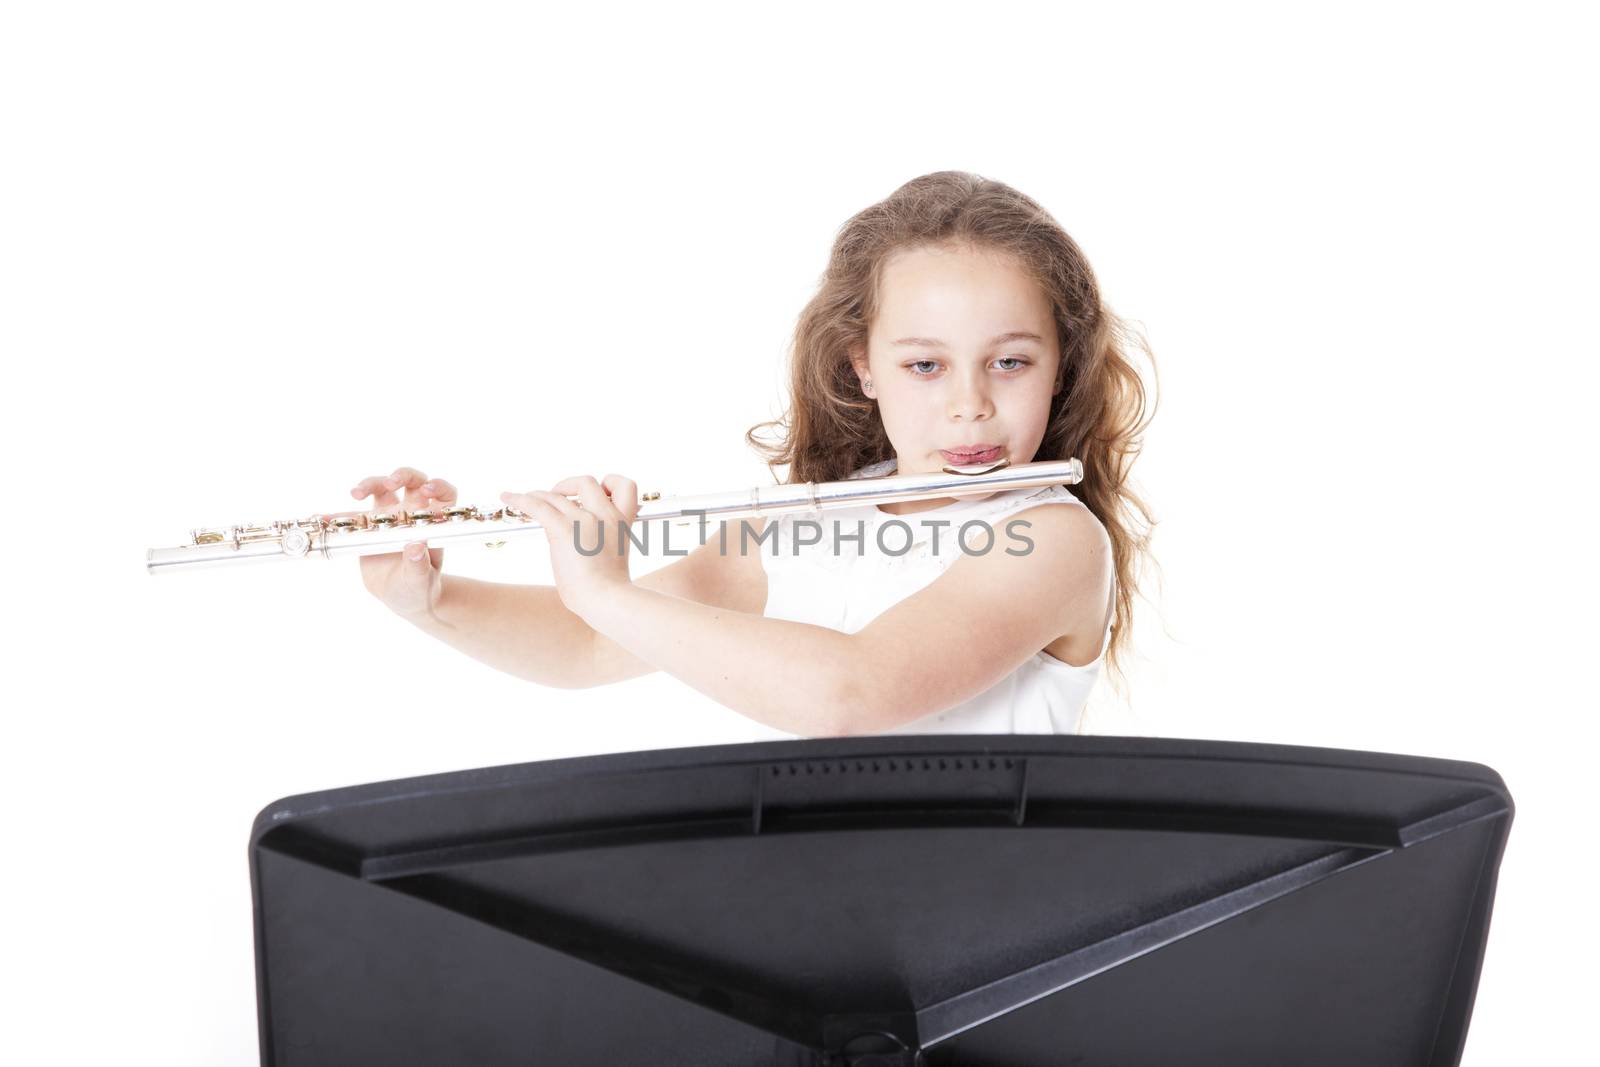 young girl playing flute against white background in studio